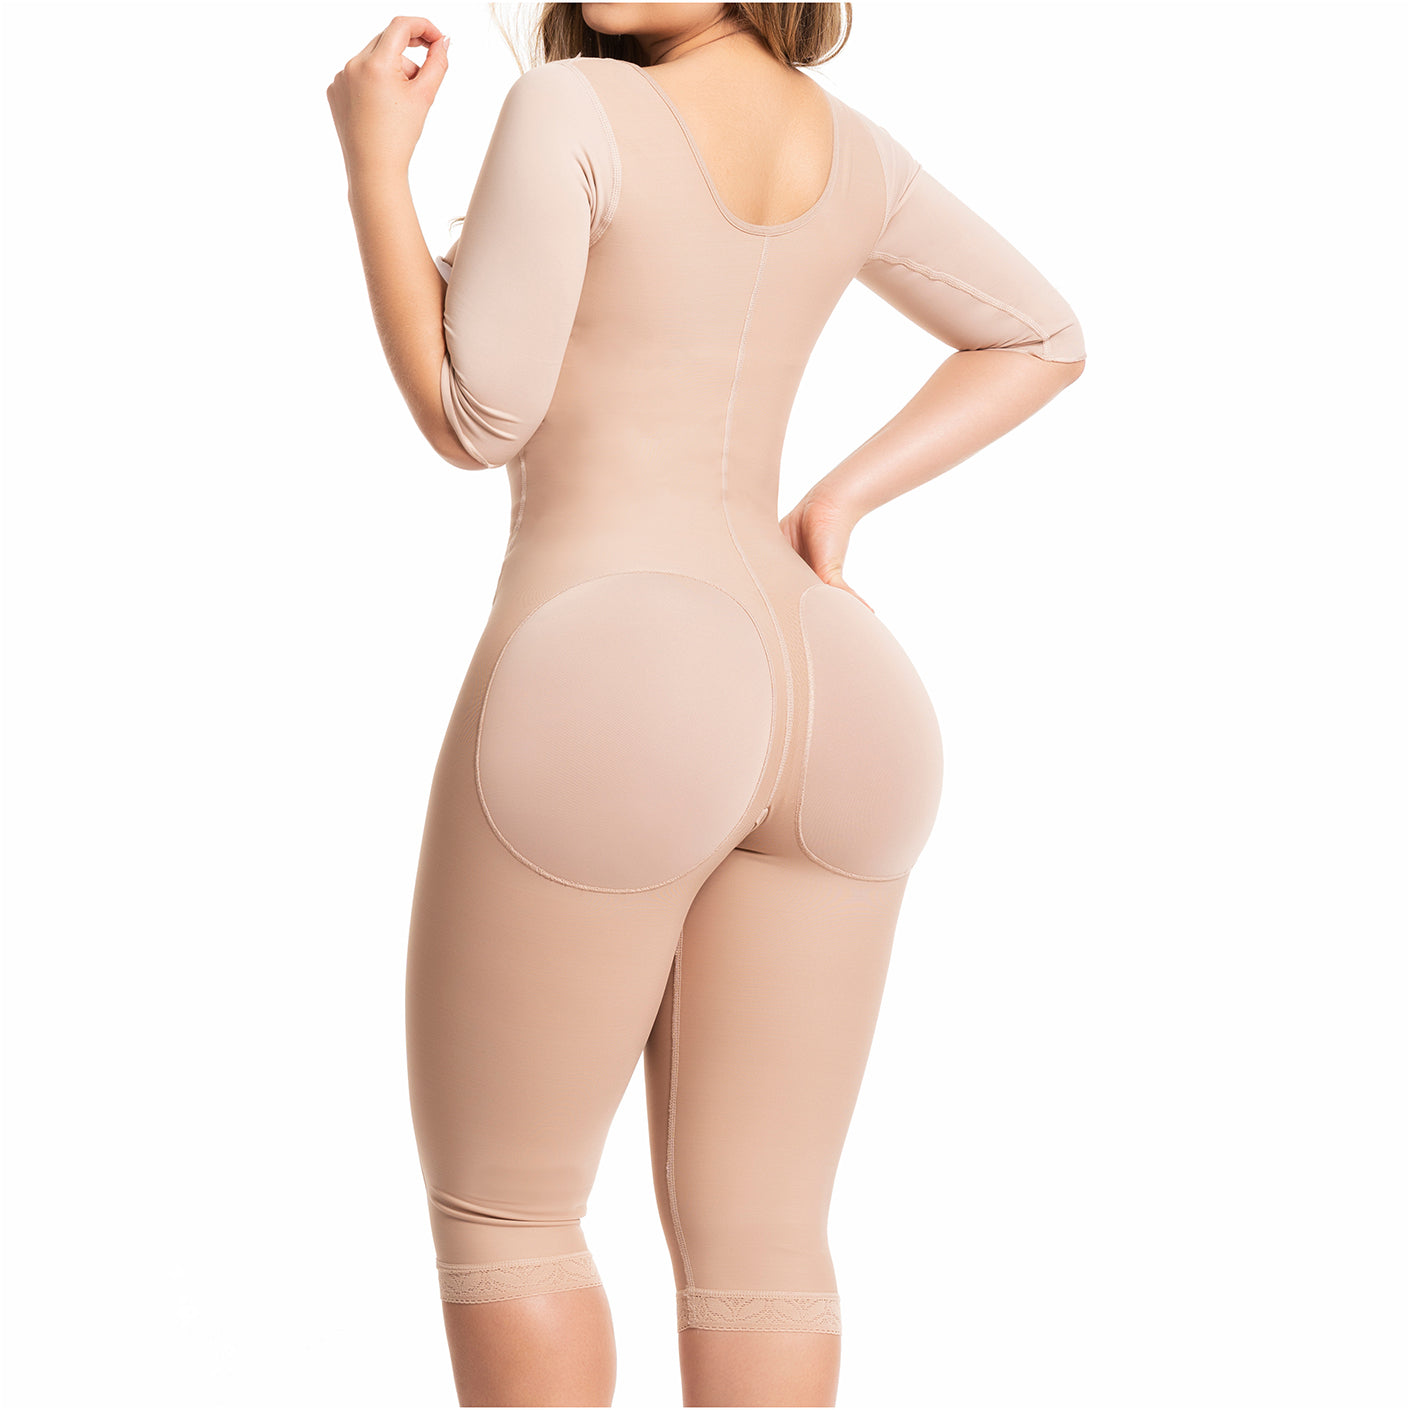 Post surgical Salome colombian Girdle 0518 - Salome Post Surgical